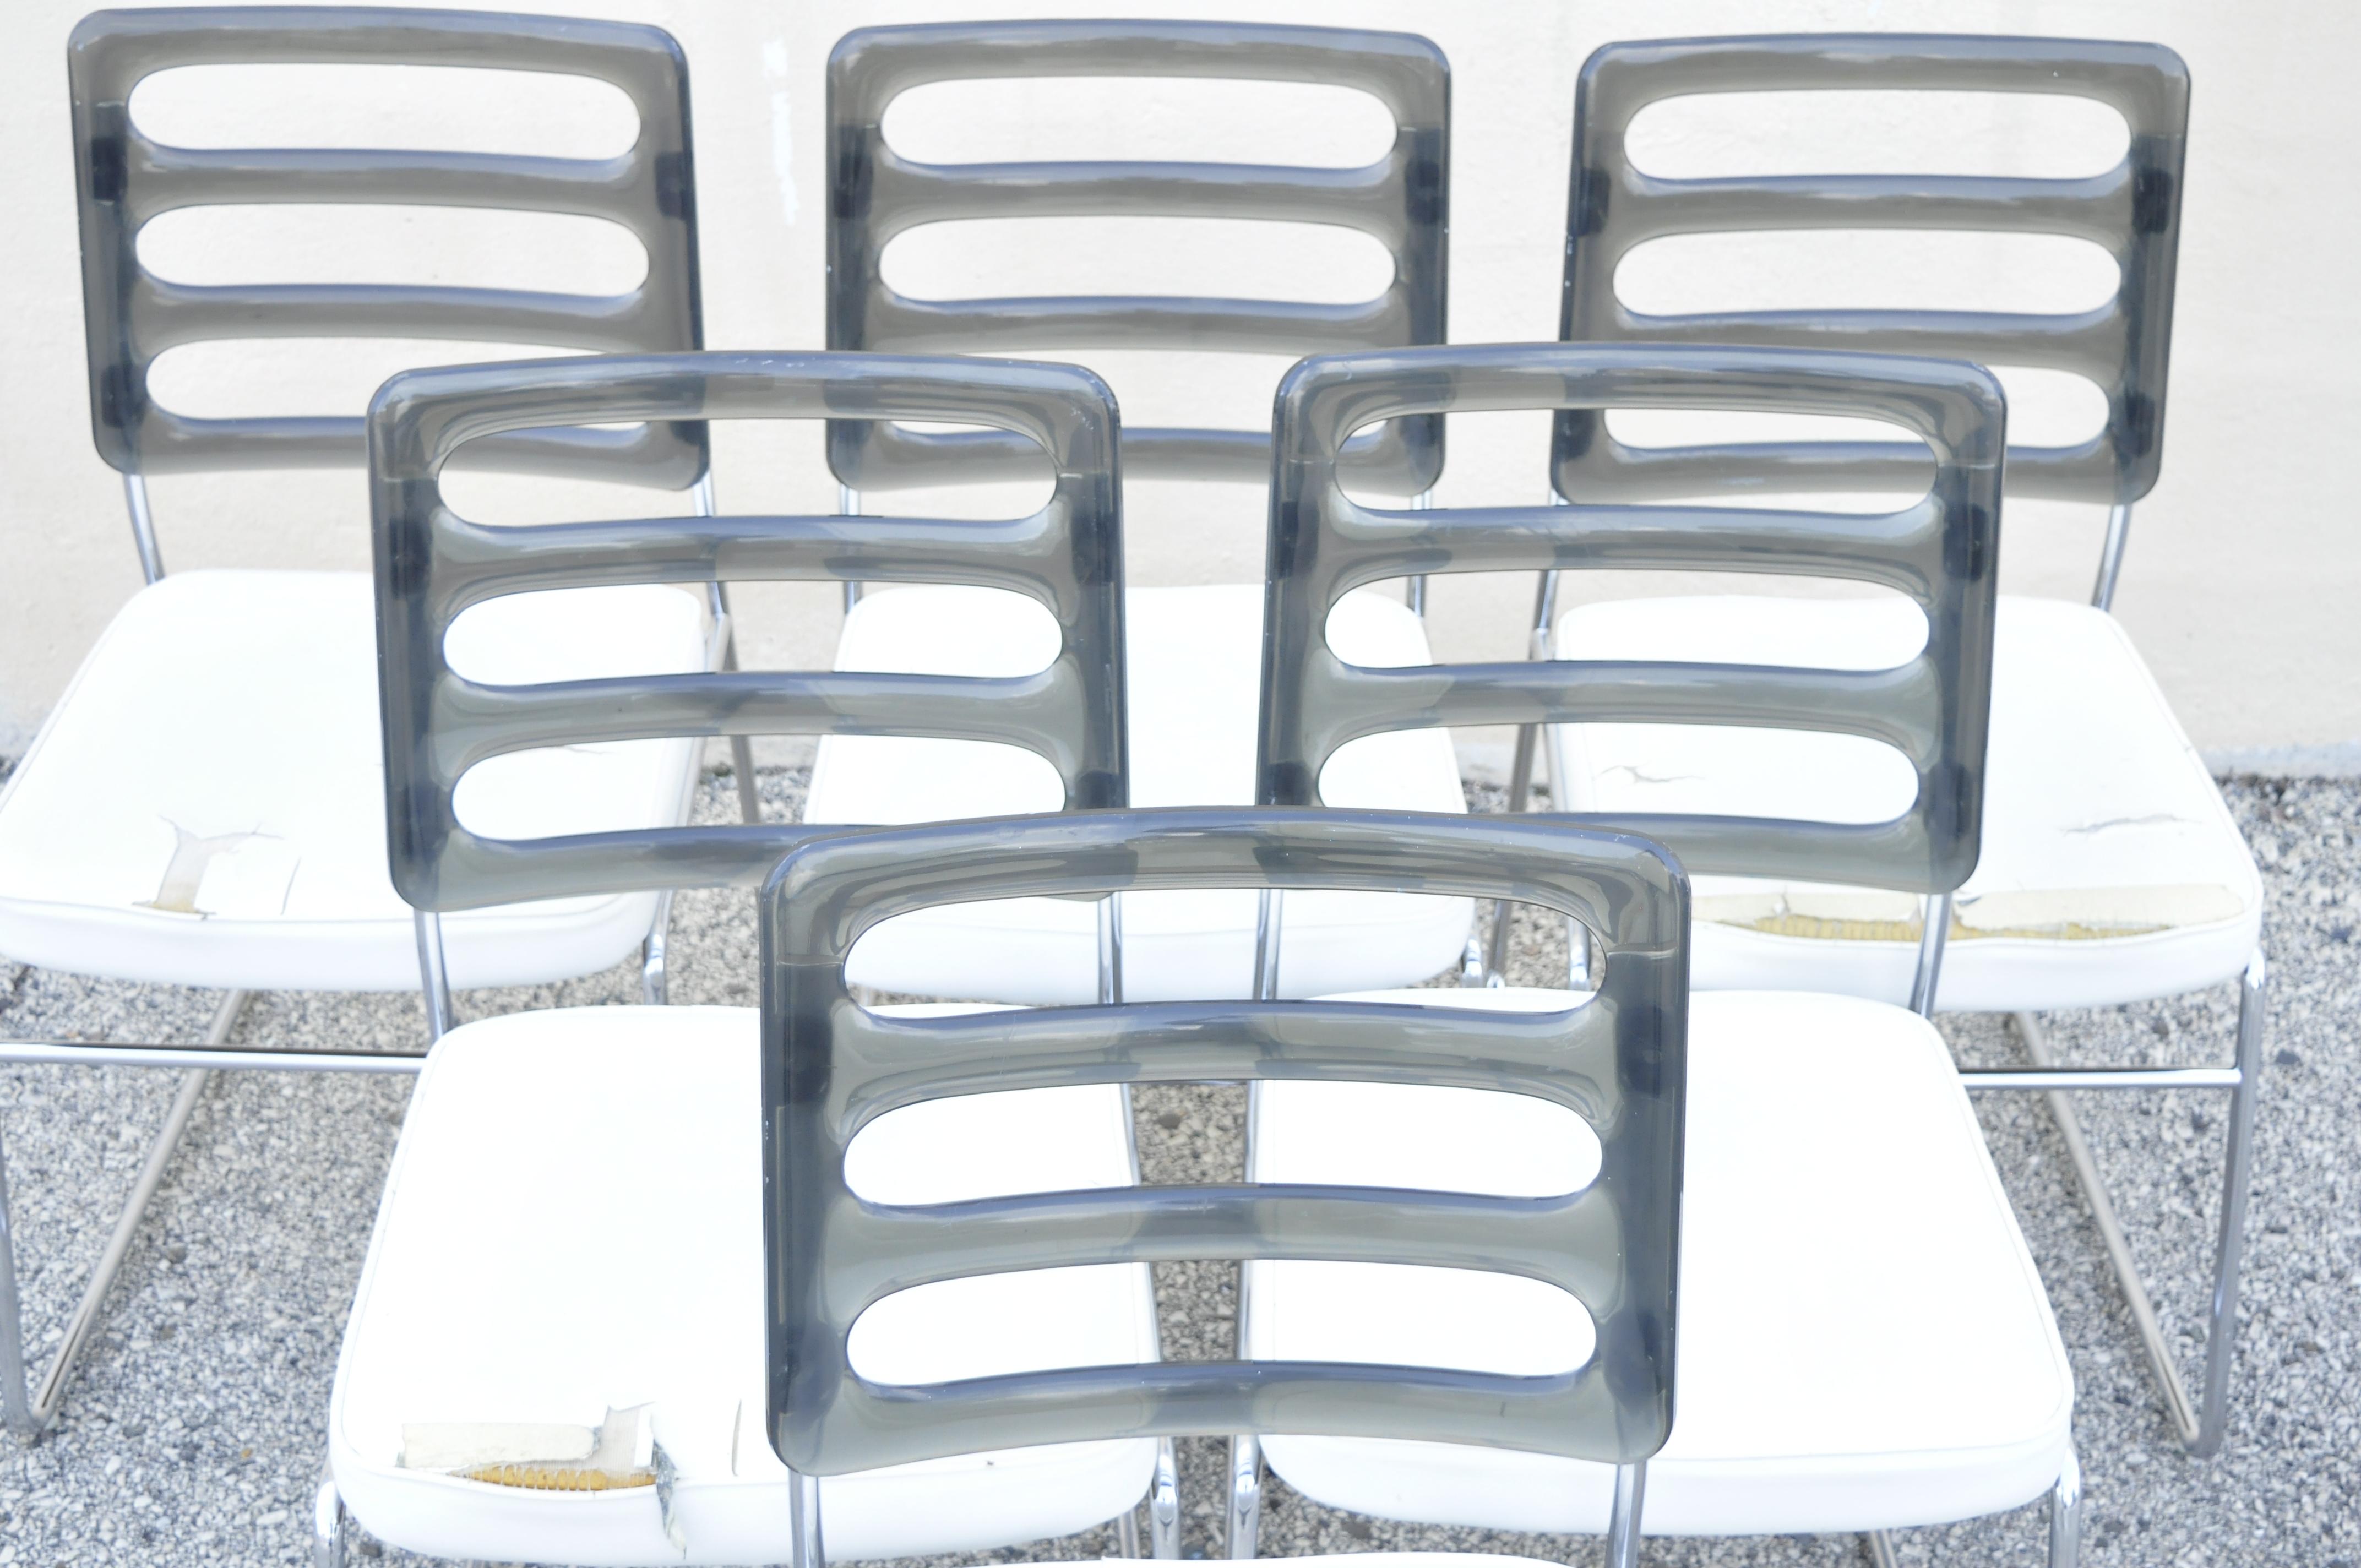 Mid-Century Modern Ssmoked Lucite back chrome frame base dining chairs - set of 6. Set includes (6) side chairs, smoked lucite backs, chrome metal frames, white naugahyde seats, very nice vintage set, clean modernist lines, great style and form.